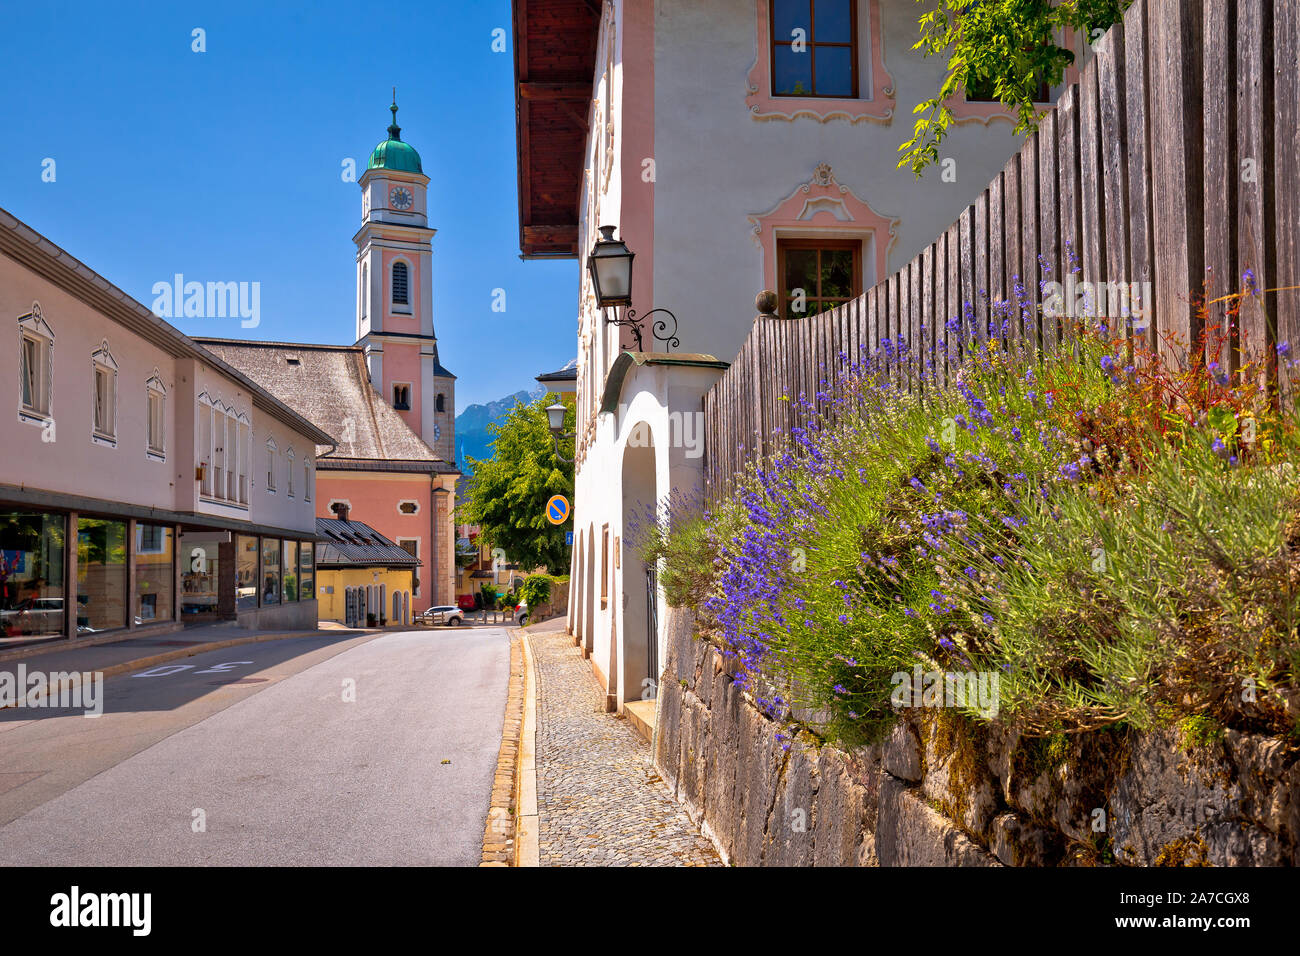 Town of Berchtesgaden church and street view, Bavaria Alps region of Germany Stock Photo